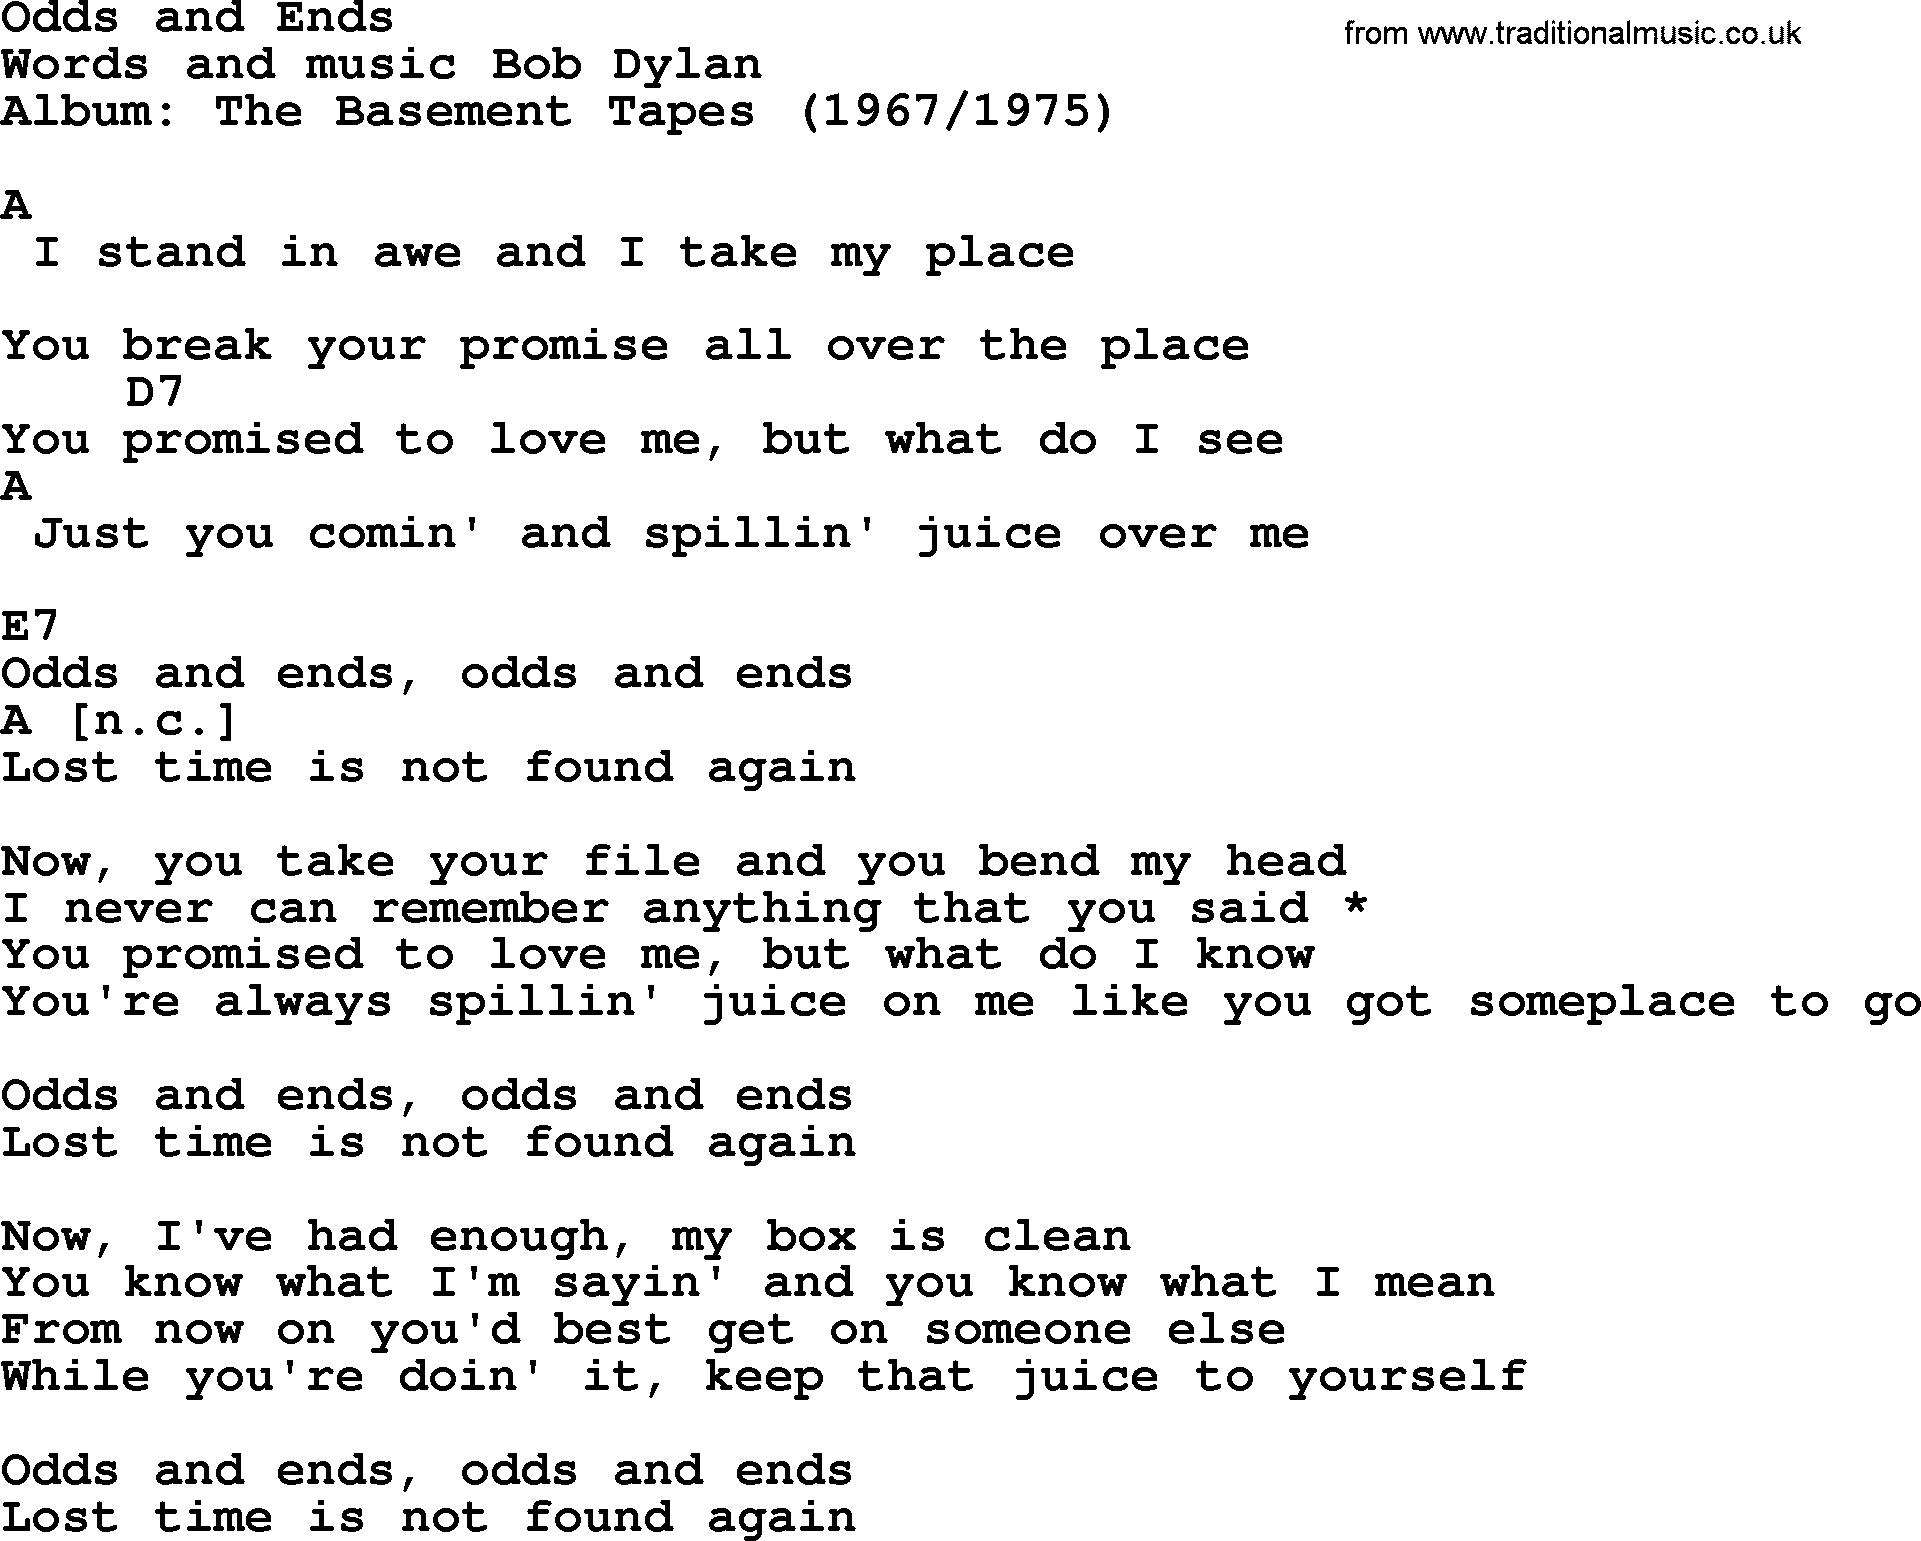 Bob Dylan song, lyrics with chords - Odds and Ends